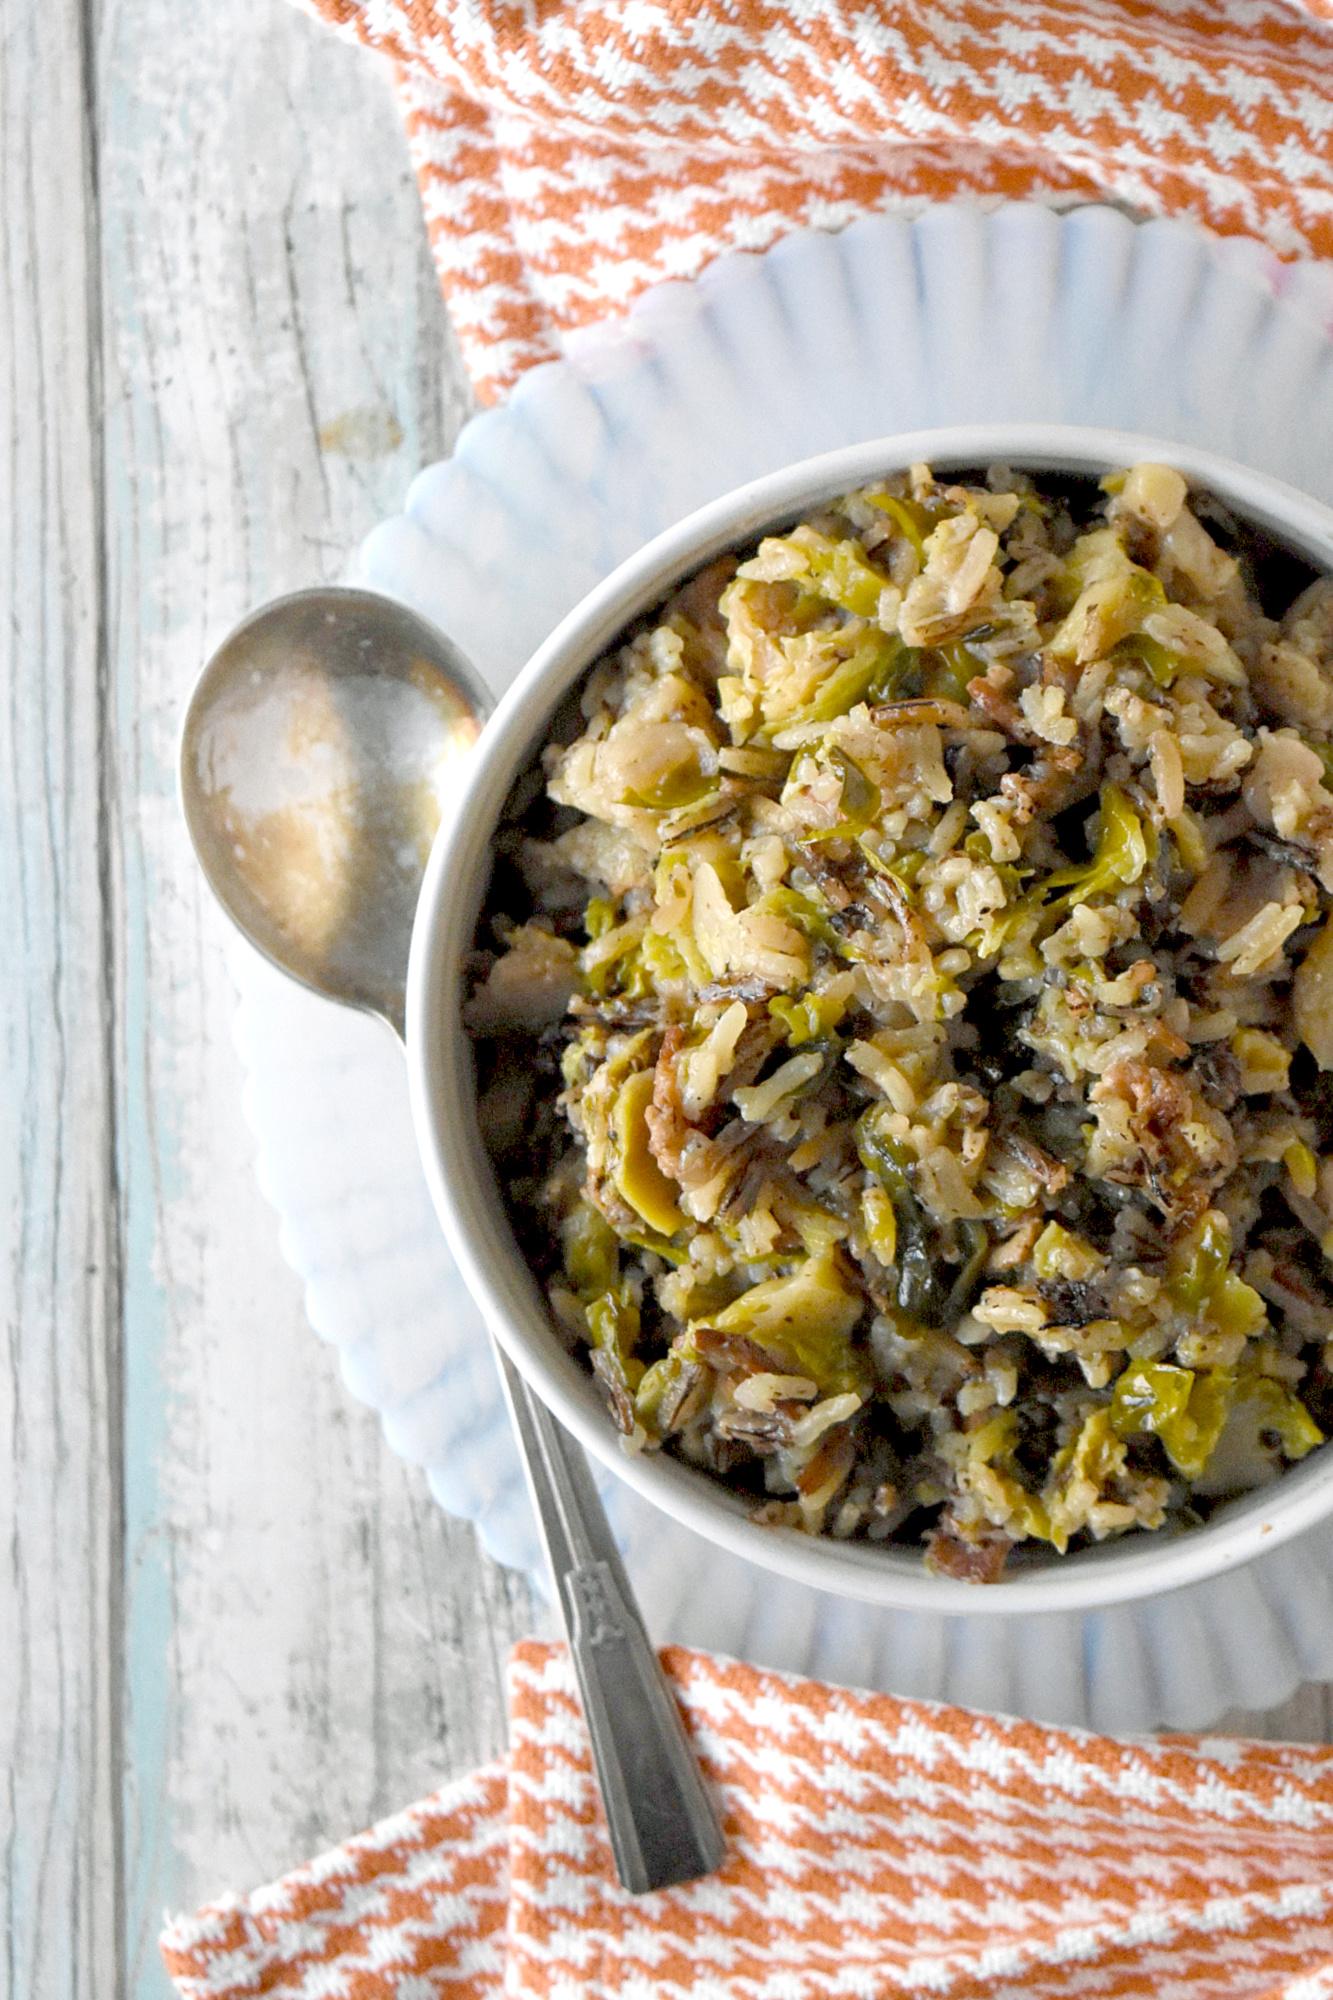 Wild Rice and Sprouts Pilaf is the perfect side dish to any holiday meal.  Any meal for that matter.  With long grain and wild rice simmered with Brussels sprouts and thick cut bacon, it’s a side dish you’re family will love! #HolidaySideDishes